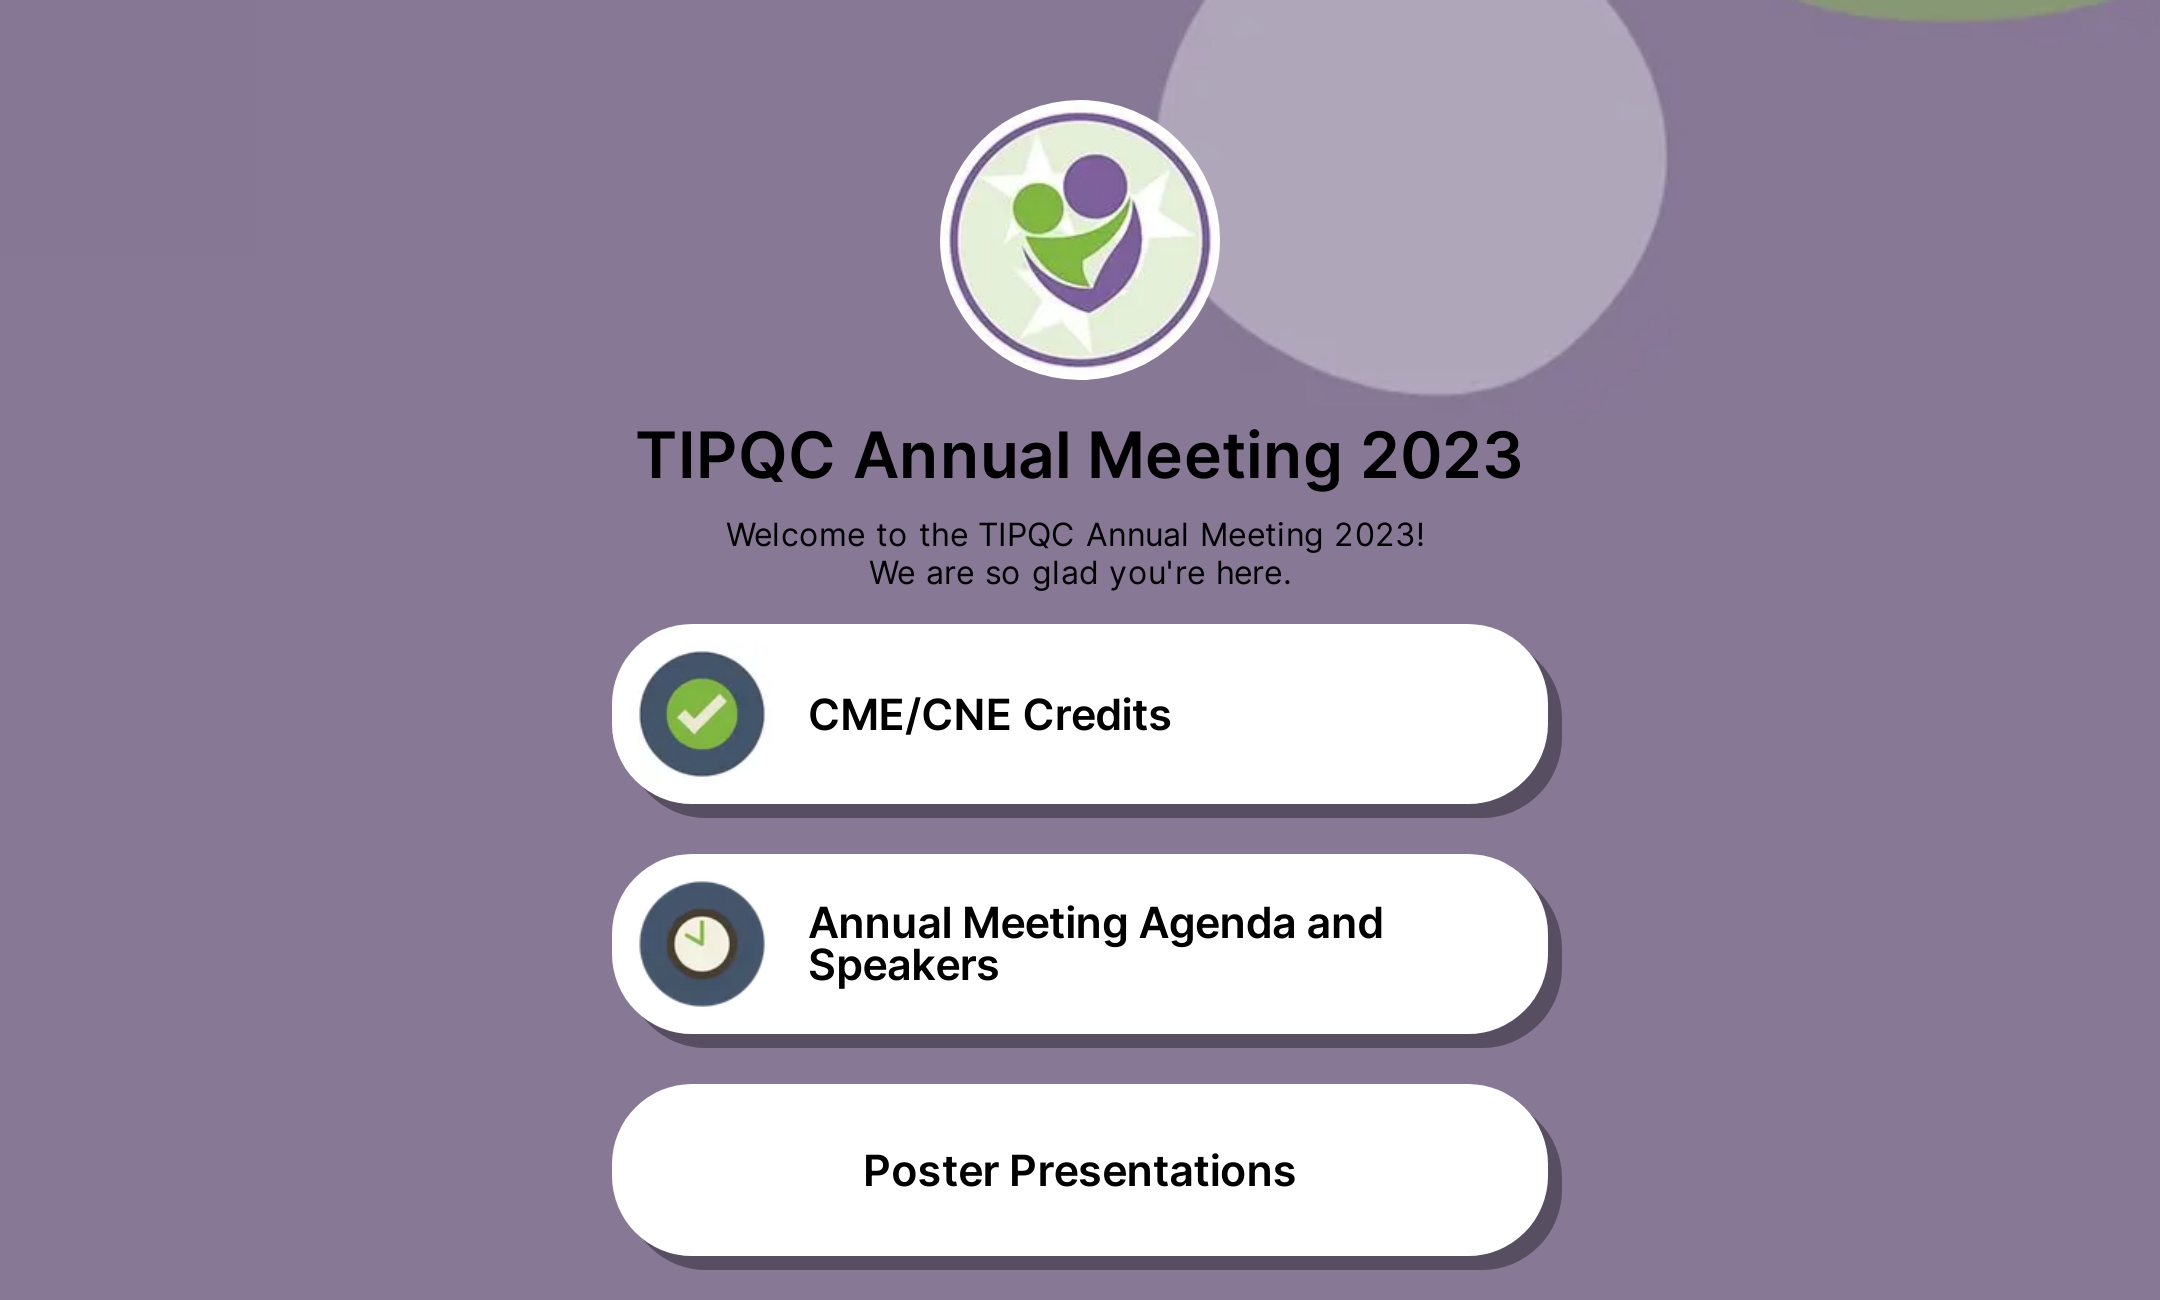 TIPQC Annual Meeting 2023's Flowpage